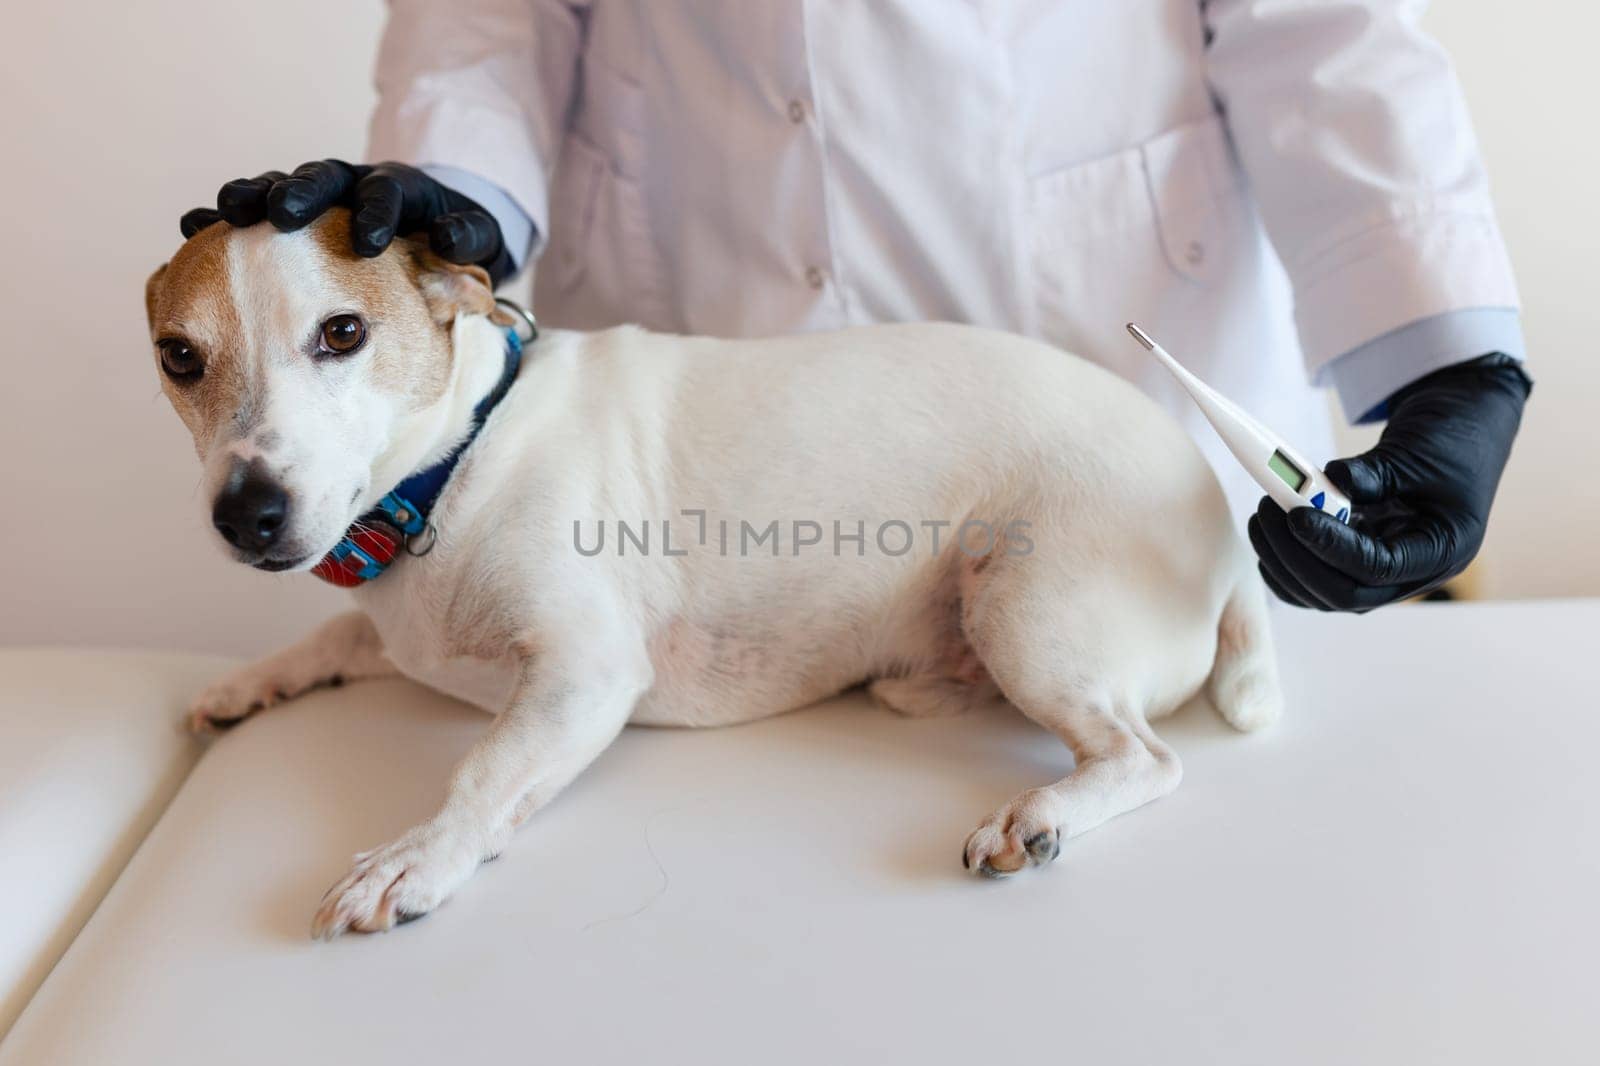 veterinarian examining a beautiful small white dog in a clinic, using a thermometer to measure the animal's temperature.